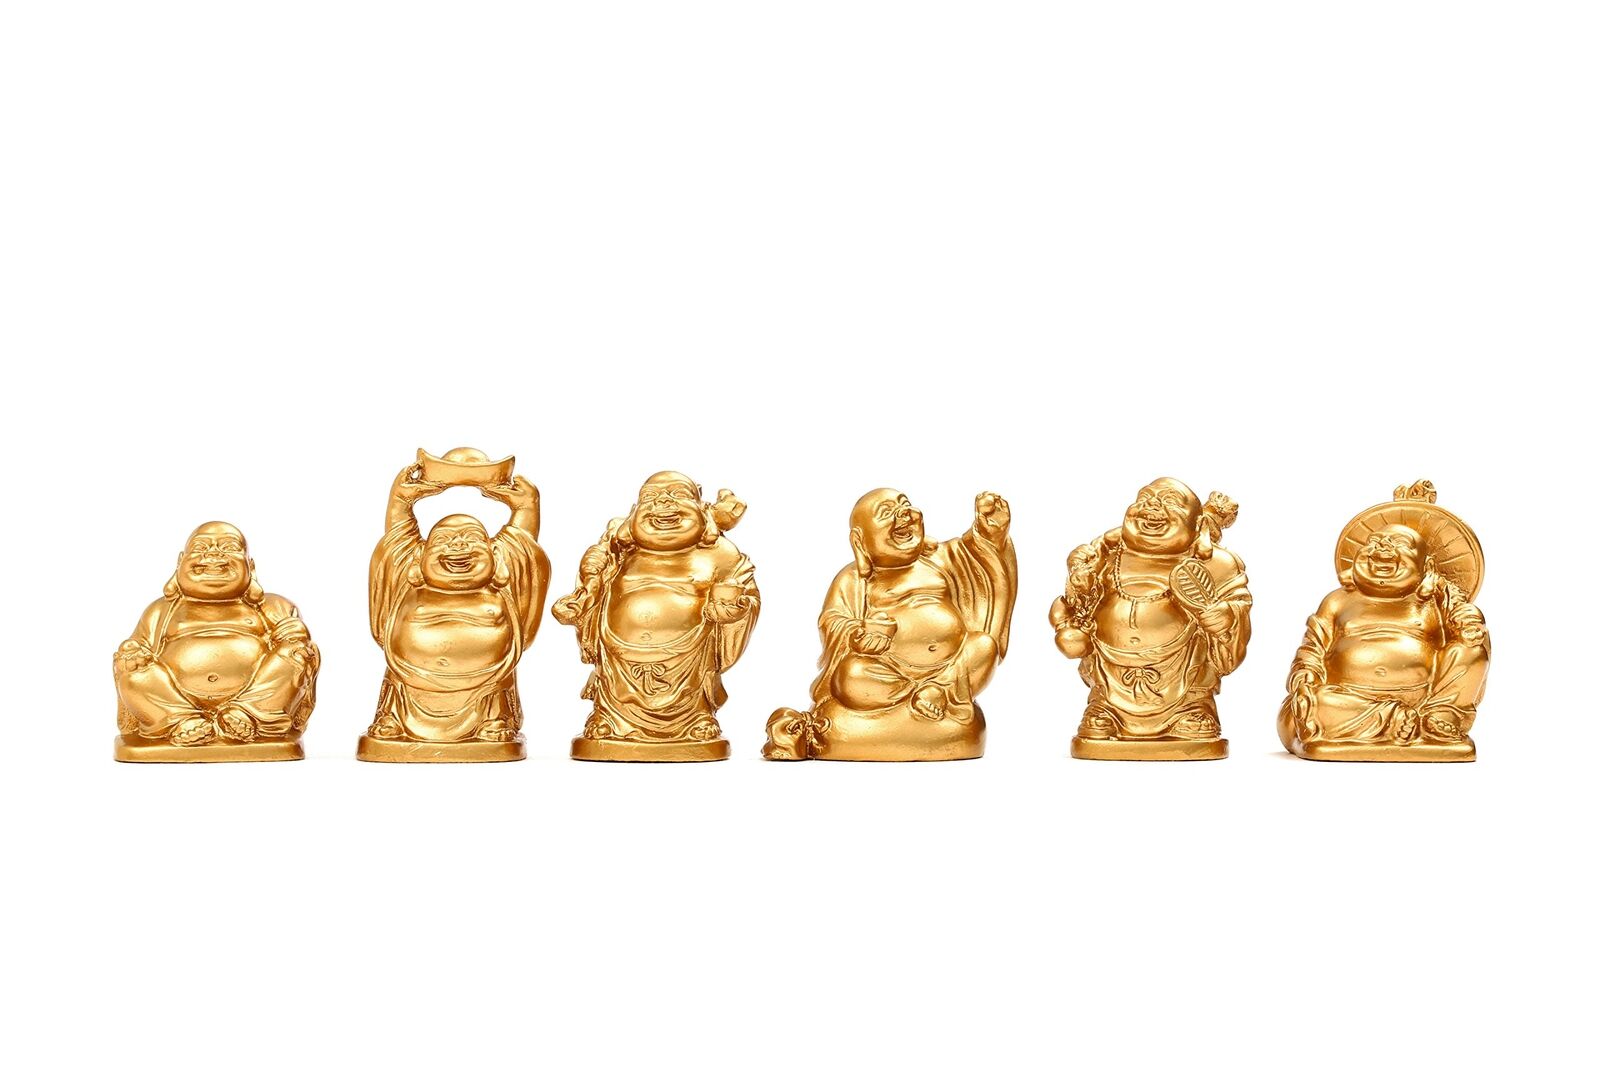 Brabud Feng Shui 2\'\' Golden Resin Laughing Buddha Statue Figurines Set Of 6 Bs01